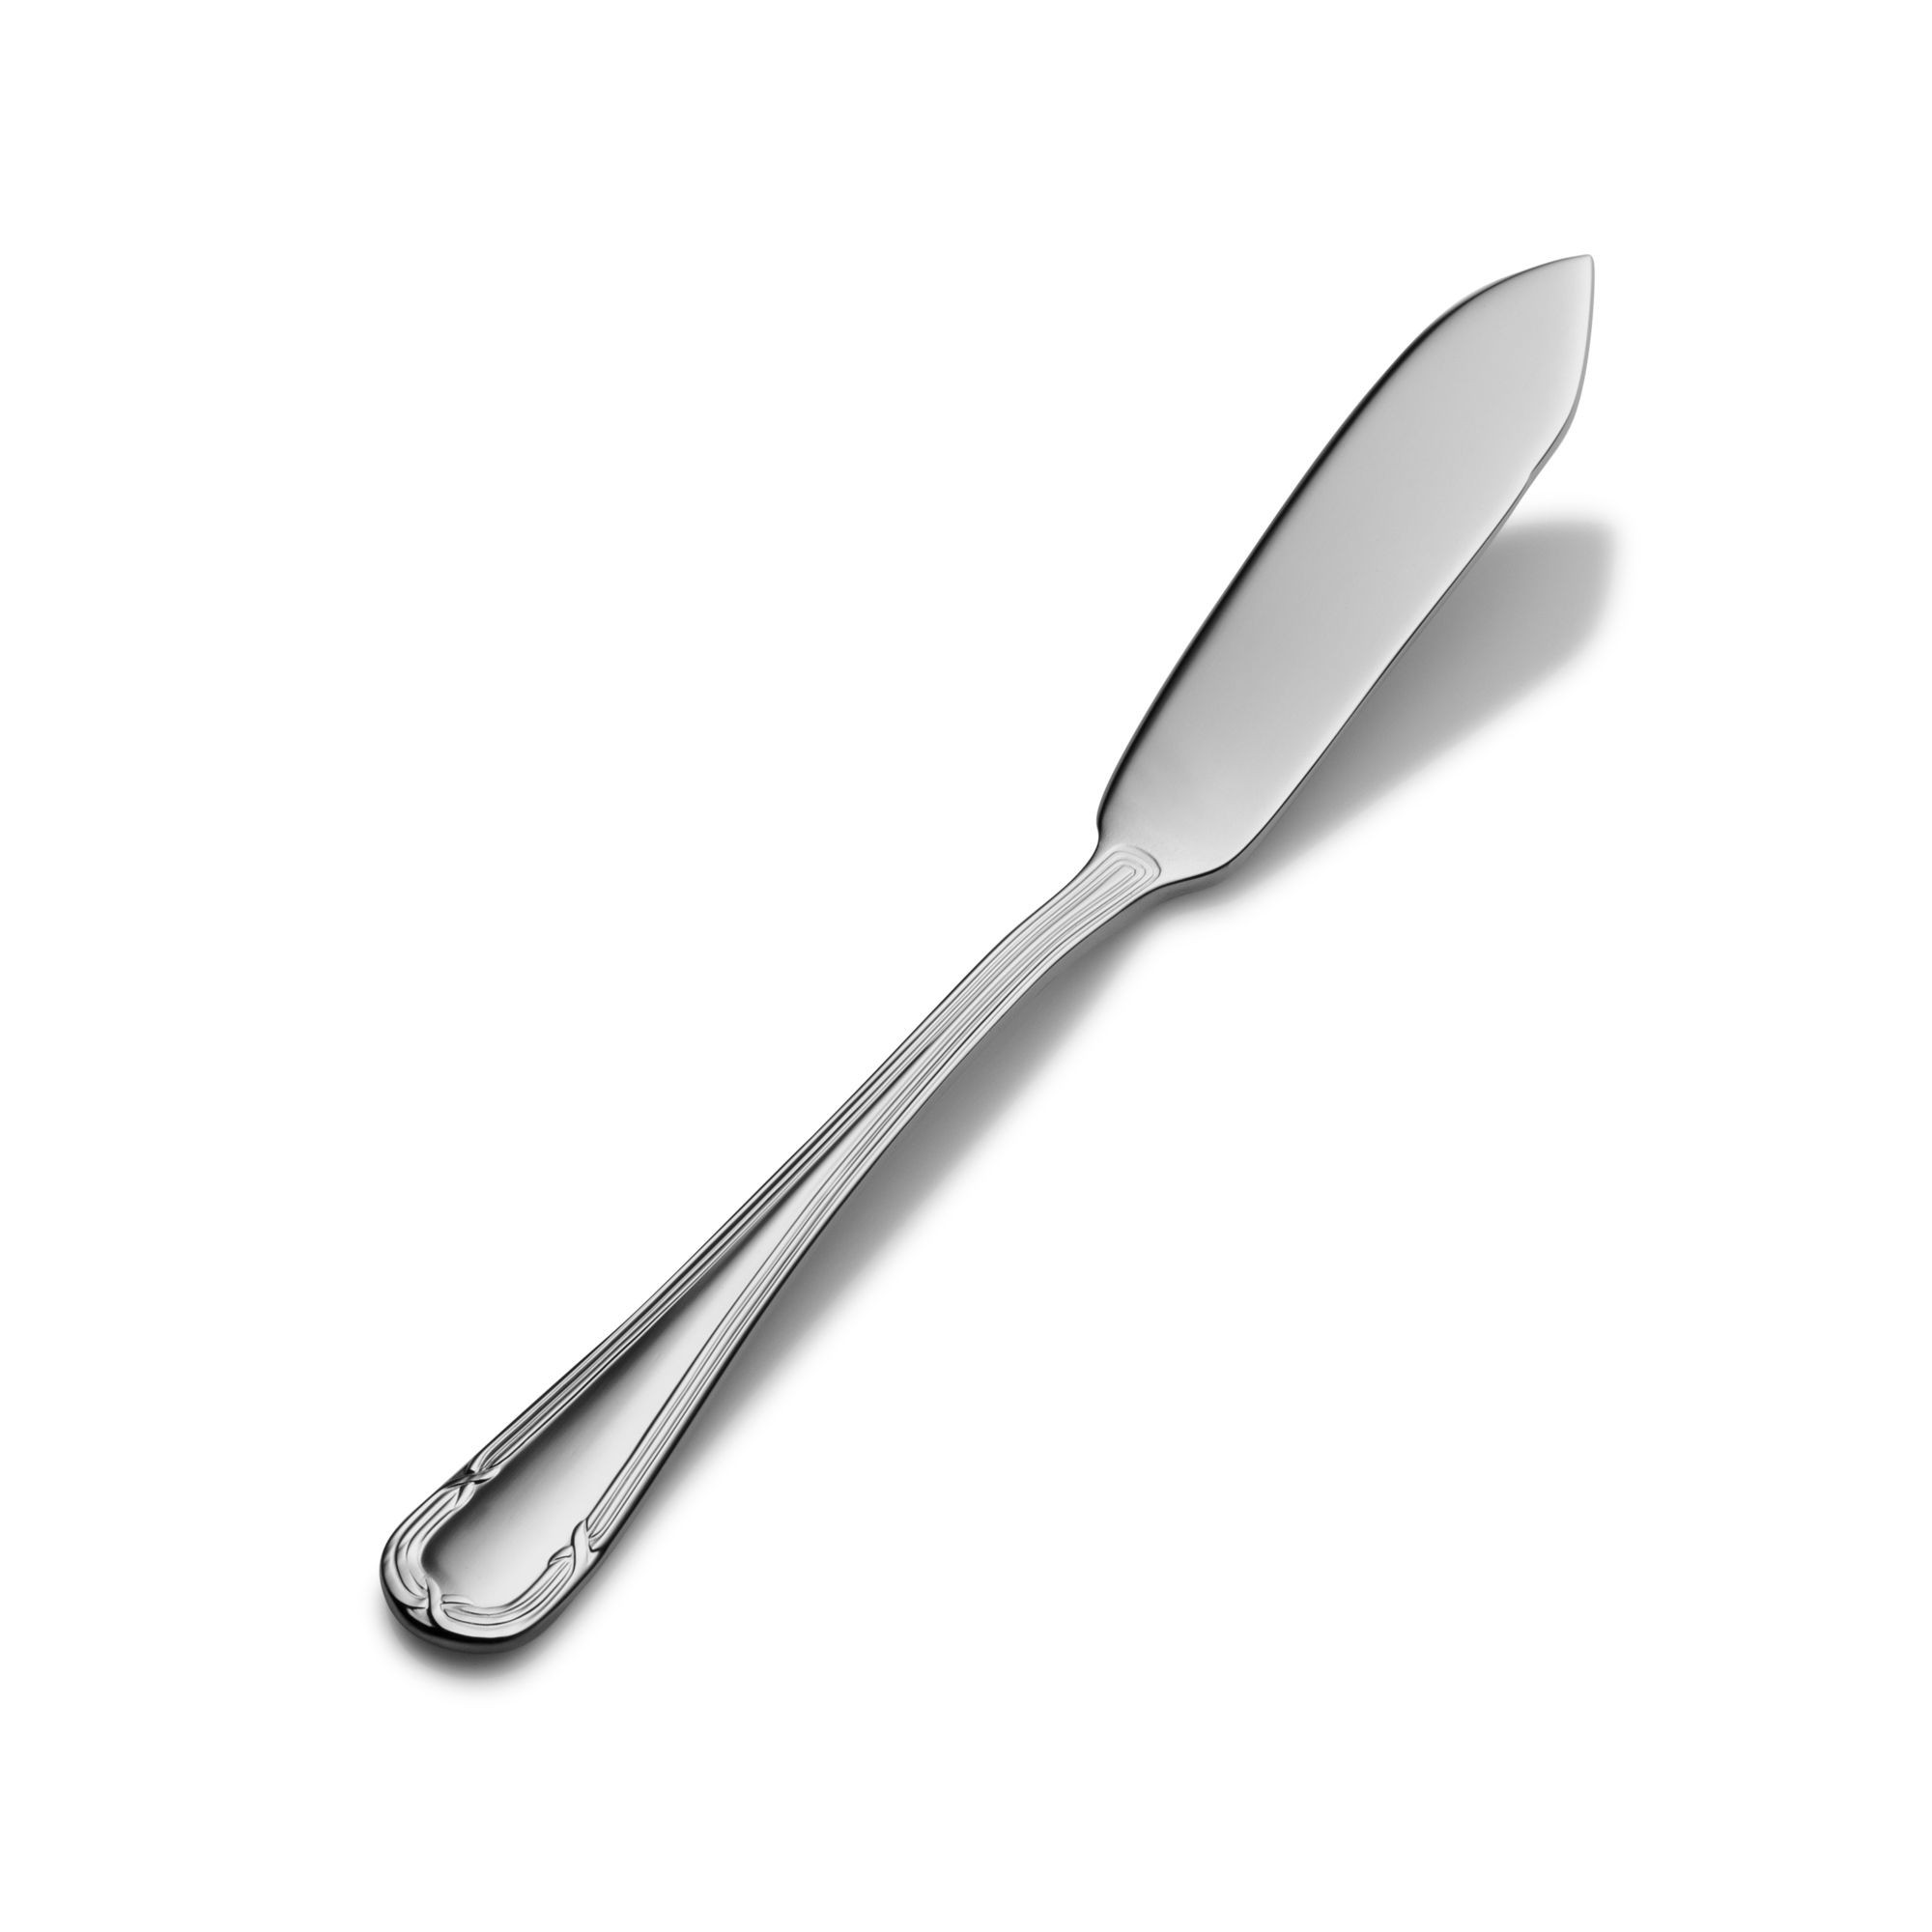 Bon Chef S813 Florence 18/8 Stainless Steel Flat Handle Butter Spreader